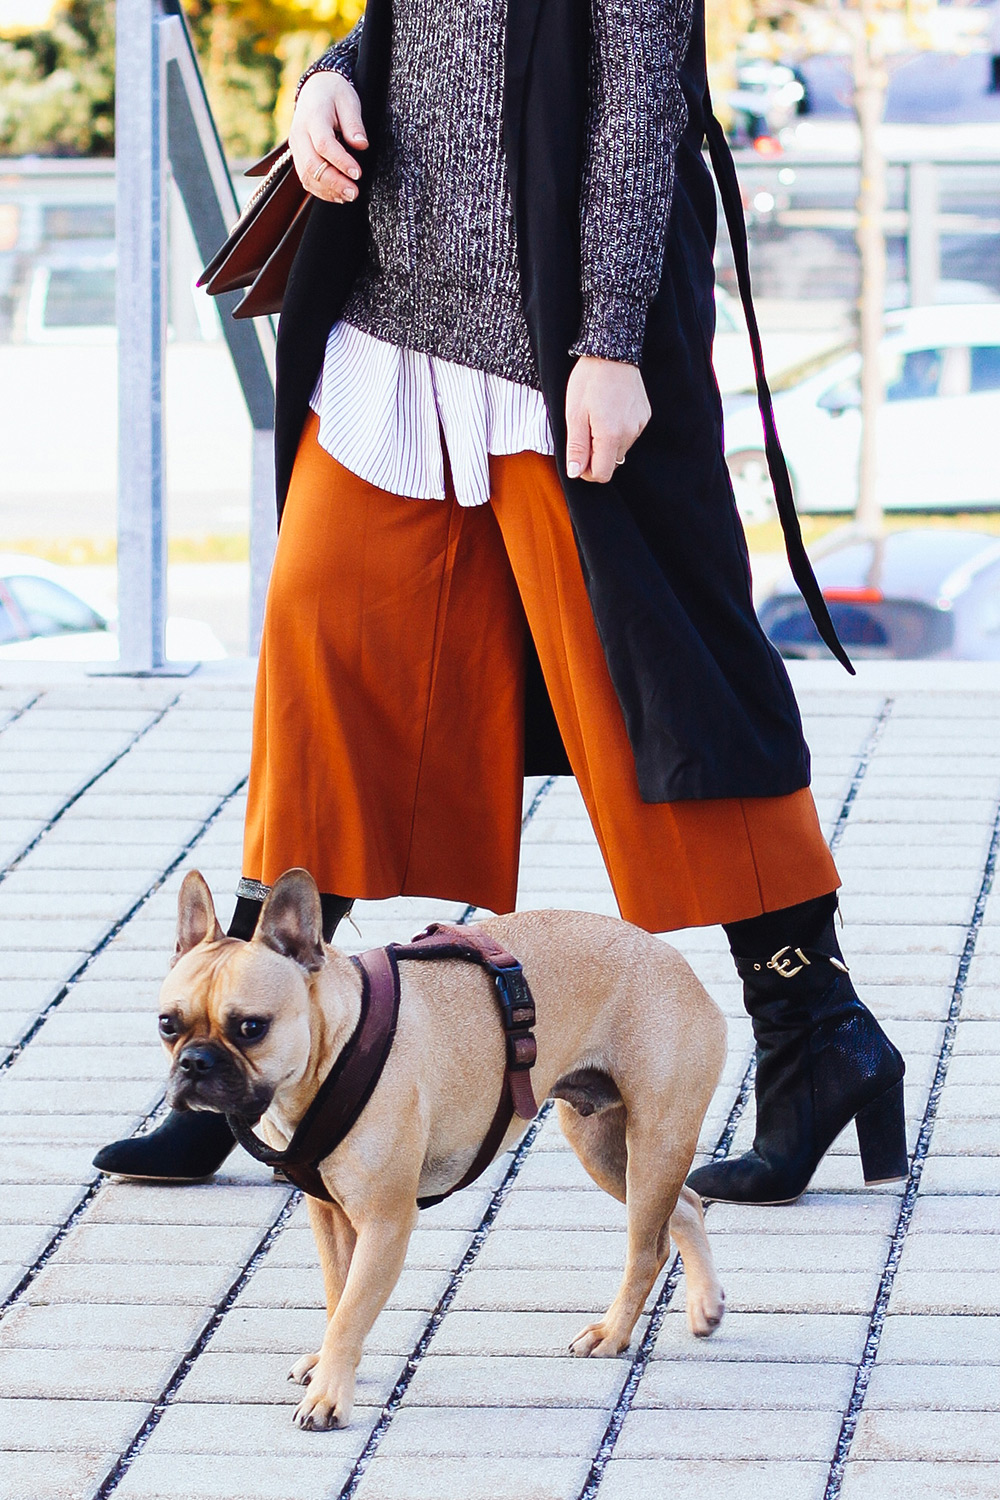 who is mocca, modeblog, fashionblog, midi boots outfit, midiboots kombinieren, culotte marsala, river island, layering outfit, lagenlook, chloe faye, frenchie, innsbruck streetstyle, whoismocca.com